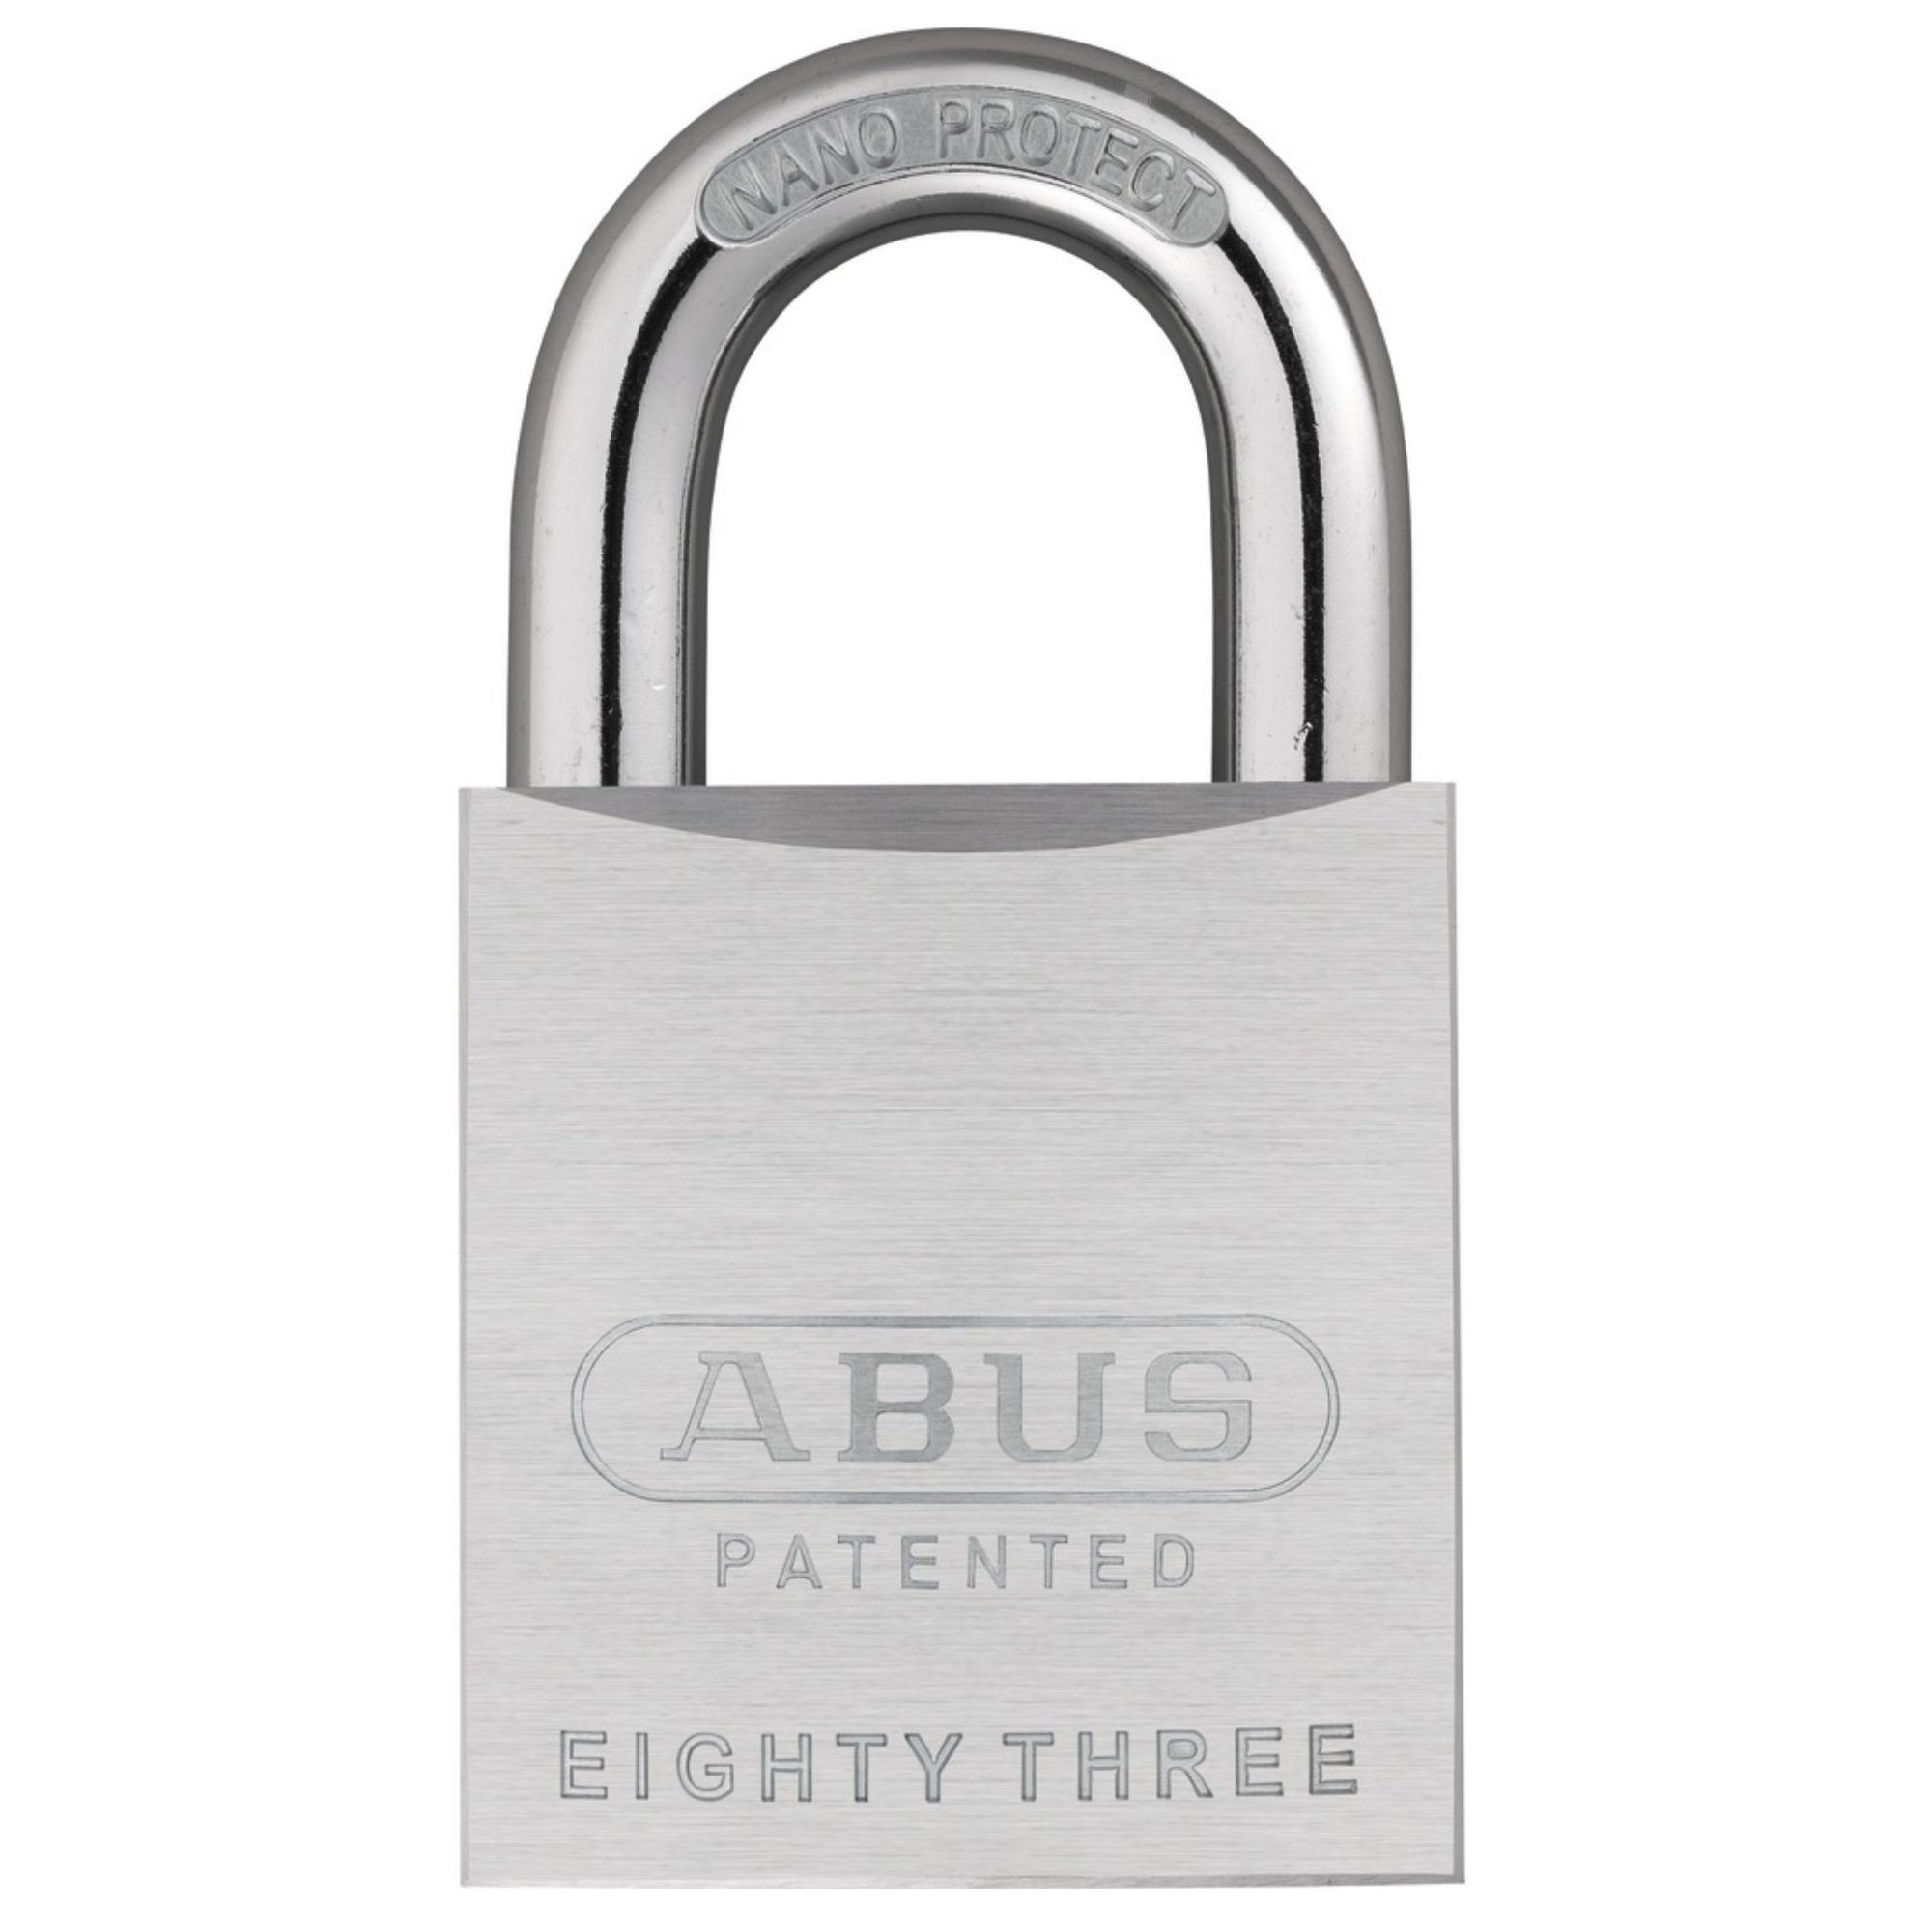 Abus 83/50 Chrome-Plated Series Lock Solid Brass Padlocks Accept Popular OEM Cylinders - The Lock Source